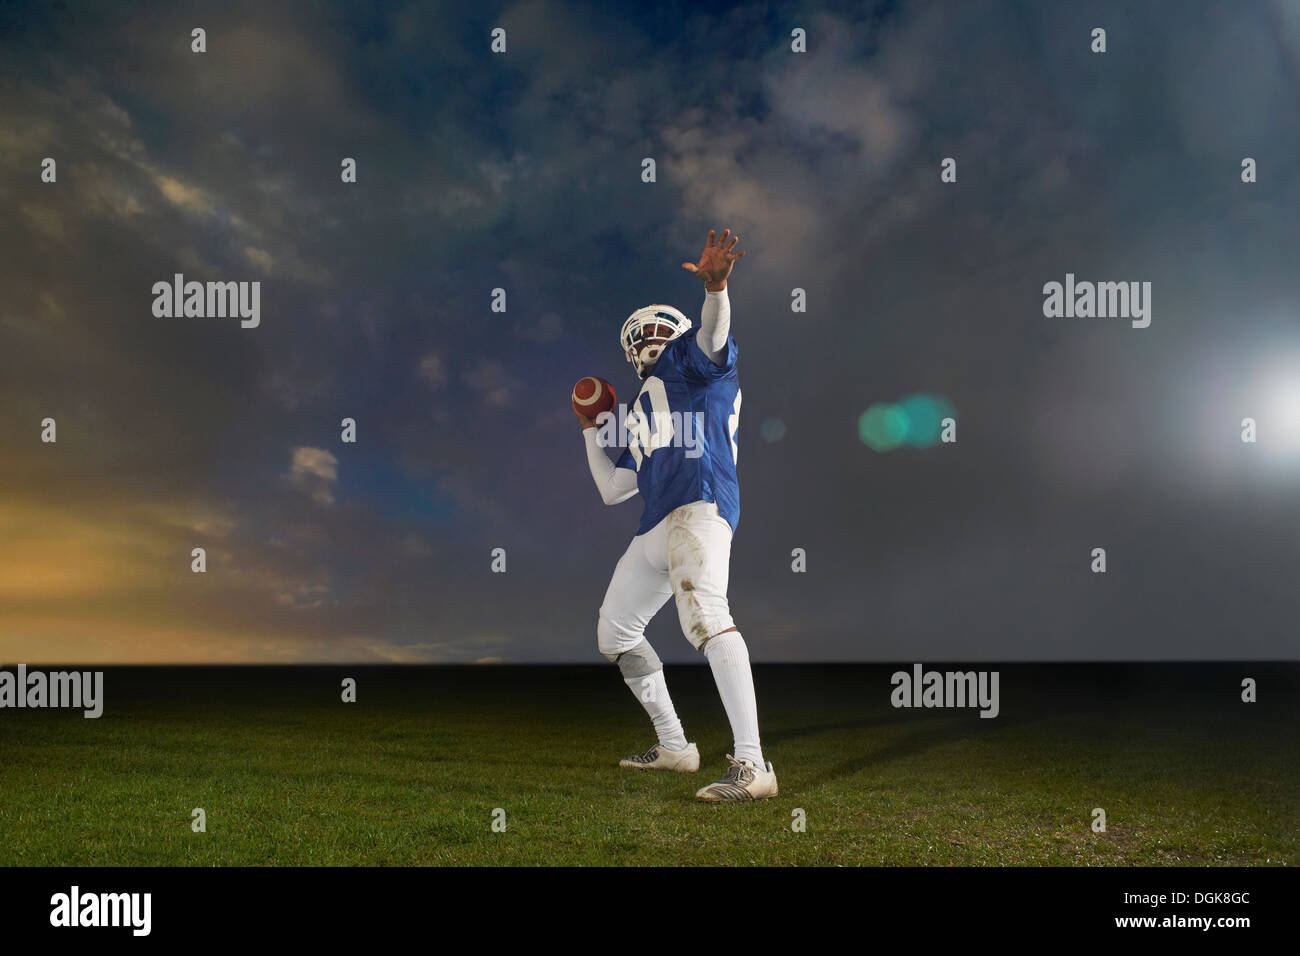 American football player in action Stock Photo